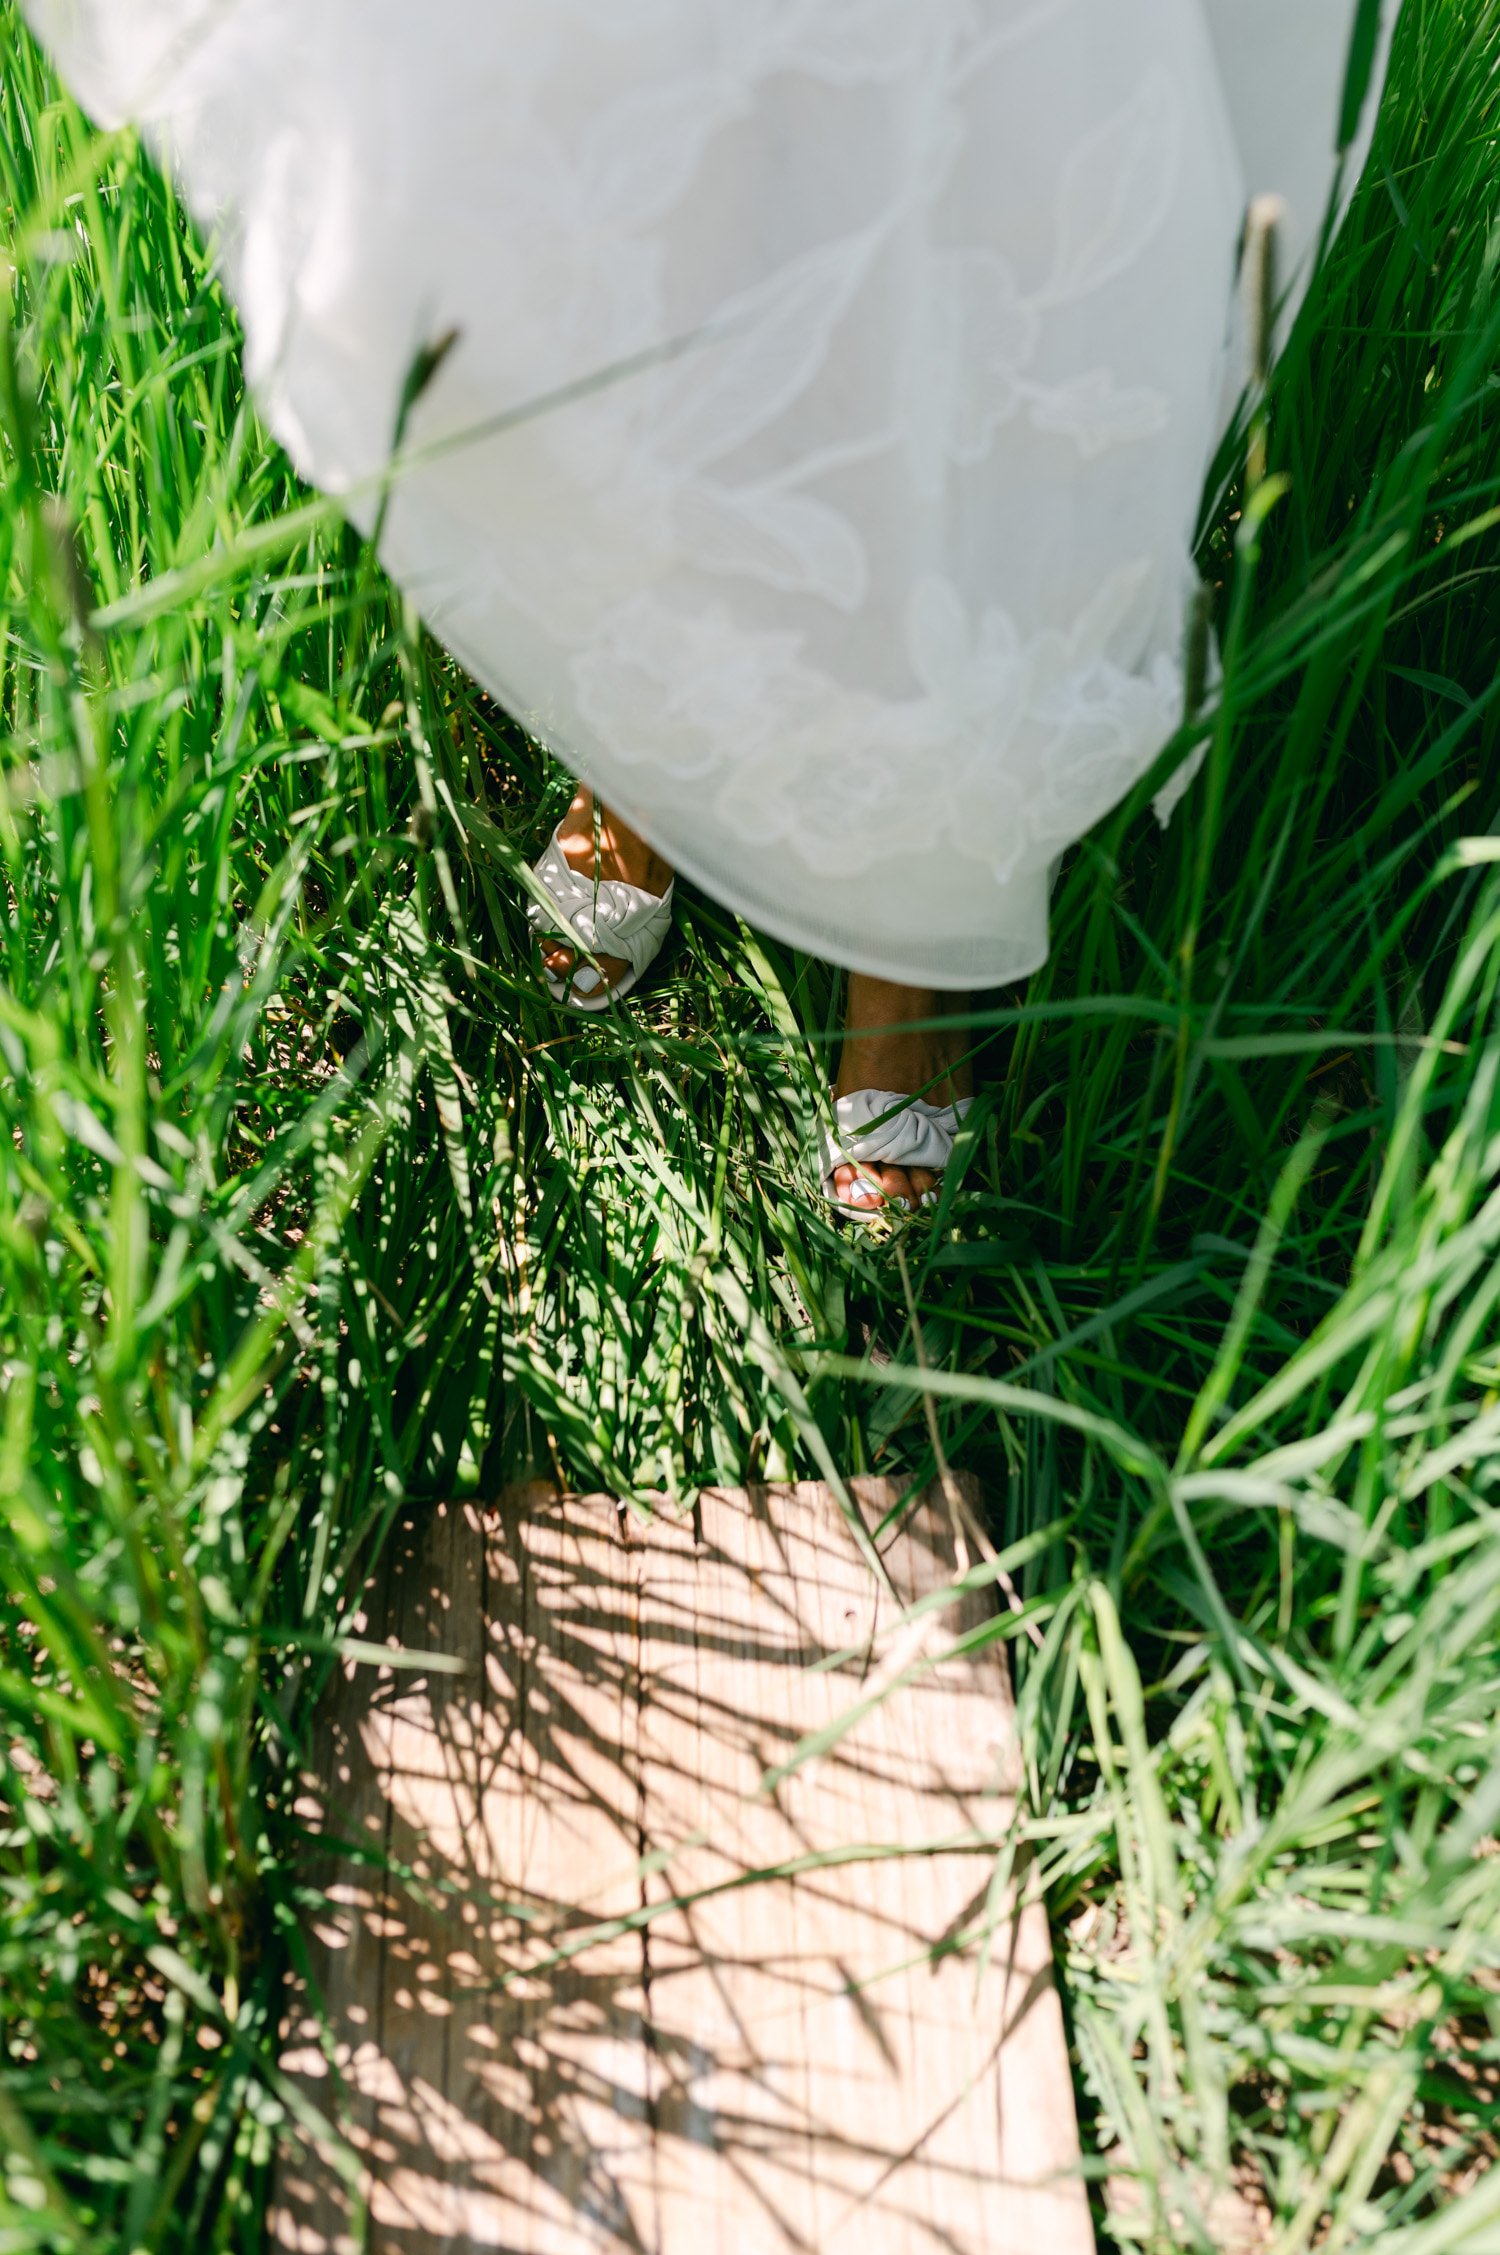 olympic valley stables wedding, photo of the bride's shoes walking on the grass